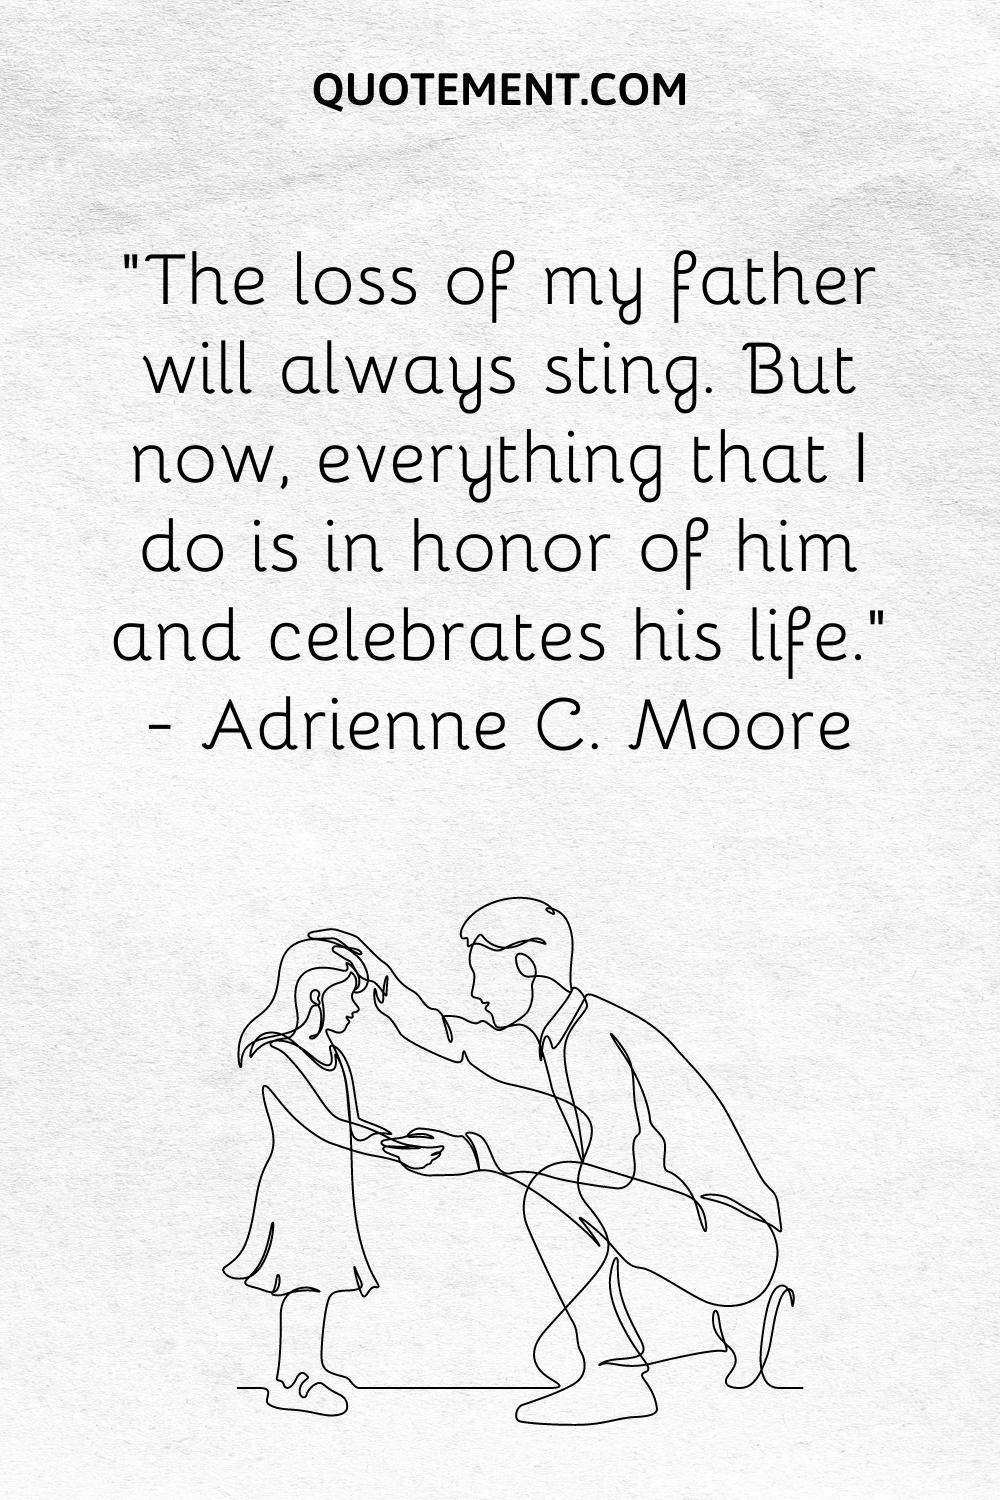 “The loss of my father will always sting. But now, everything that I do is in honor of him and celebrates his life.” — Adrienne C. Moore